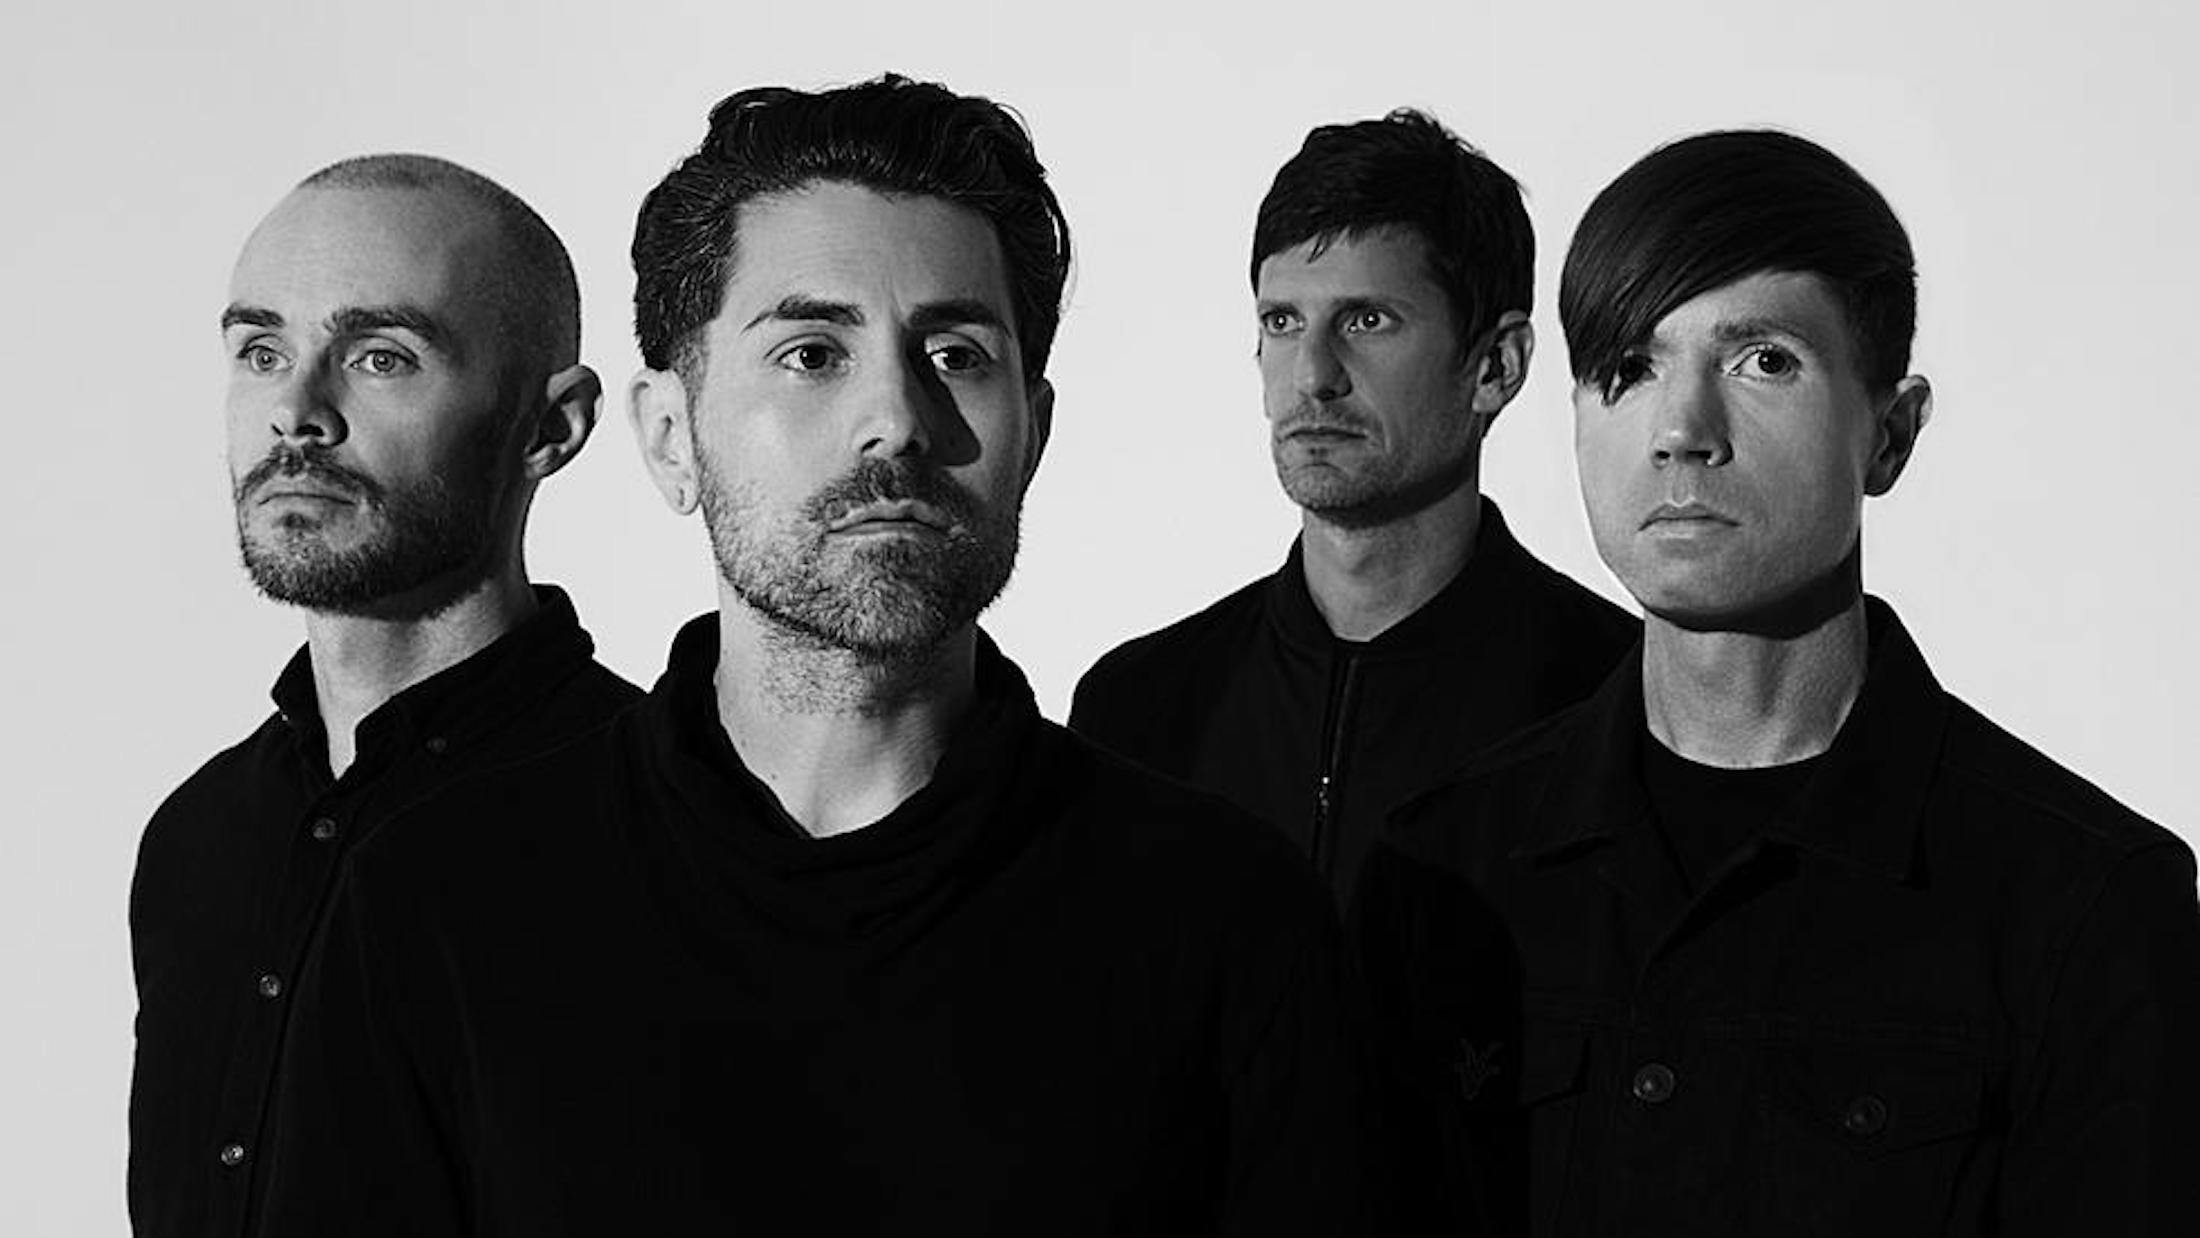 AFI confirm they will release a new album in 2021